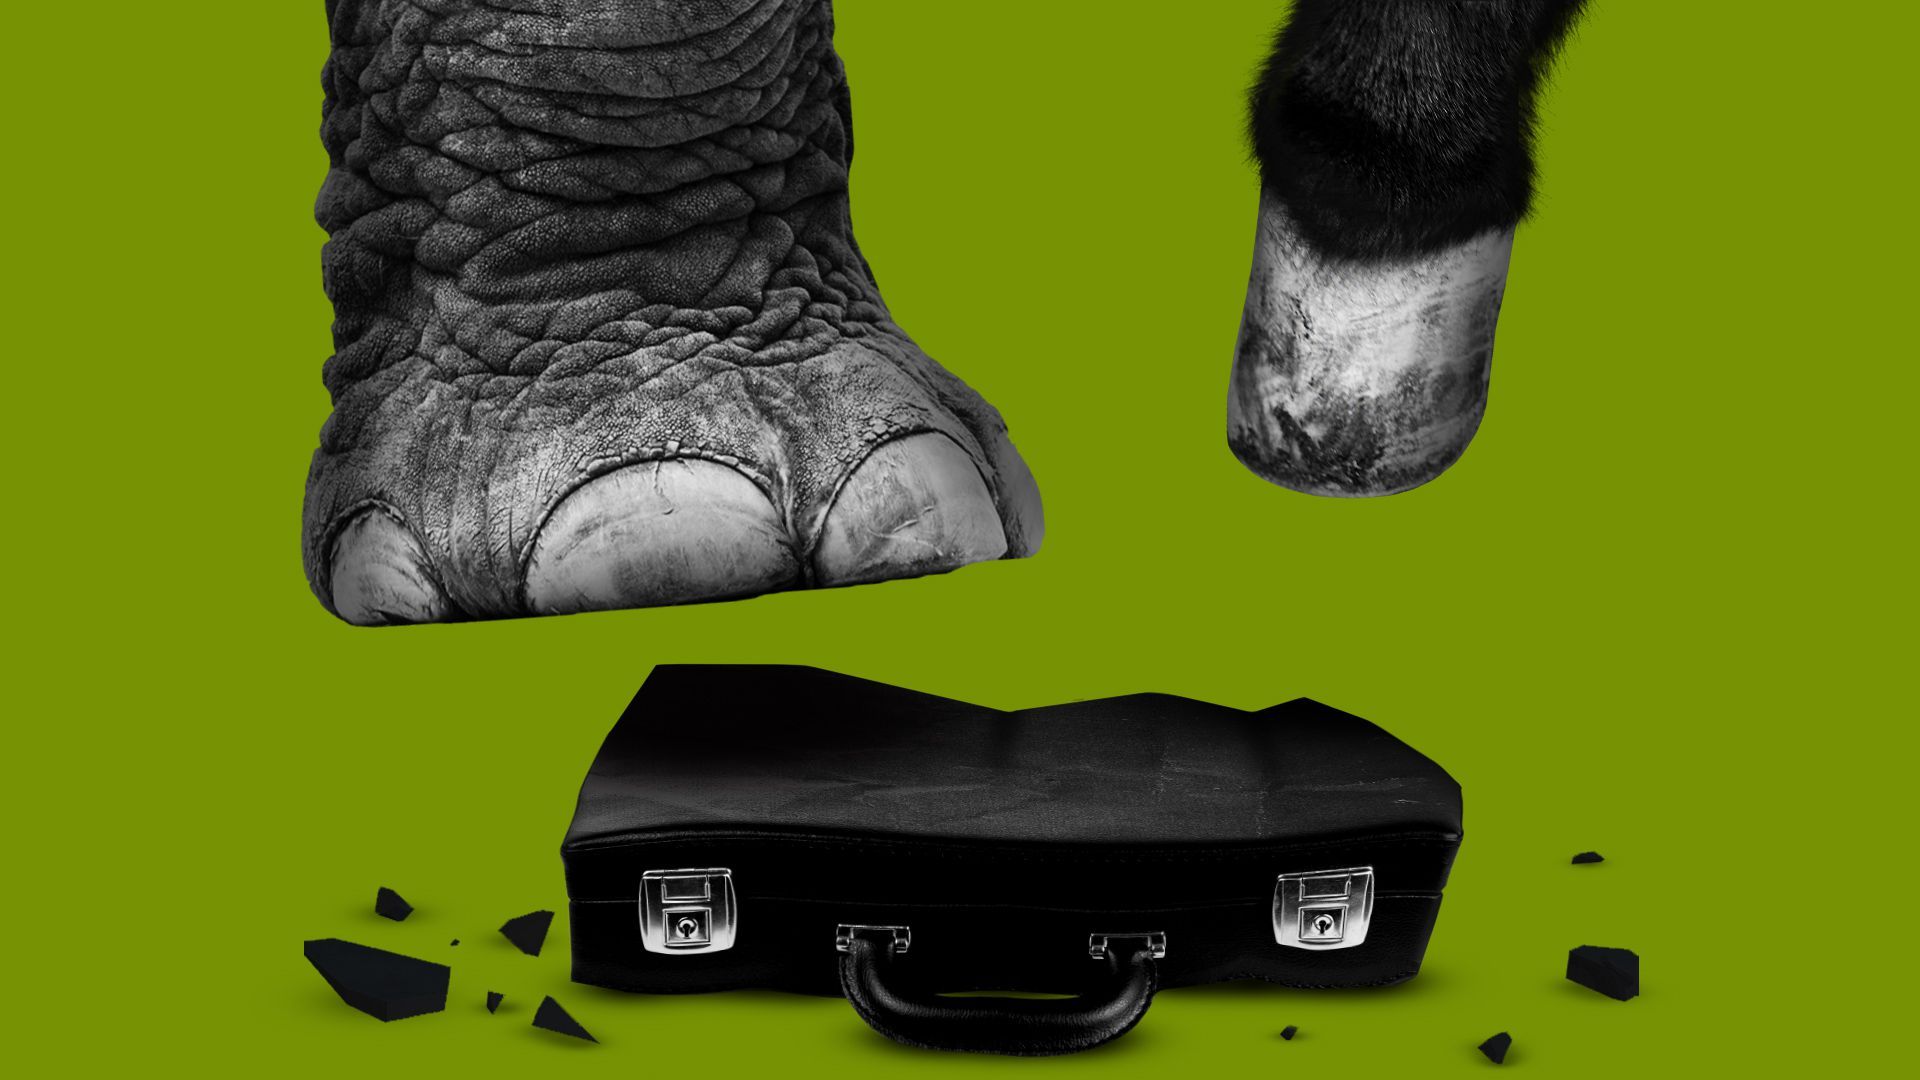 Illustration of an elephant foot and a donkey hoof beating up a briefcase. 